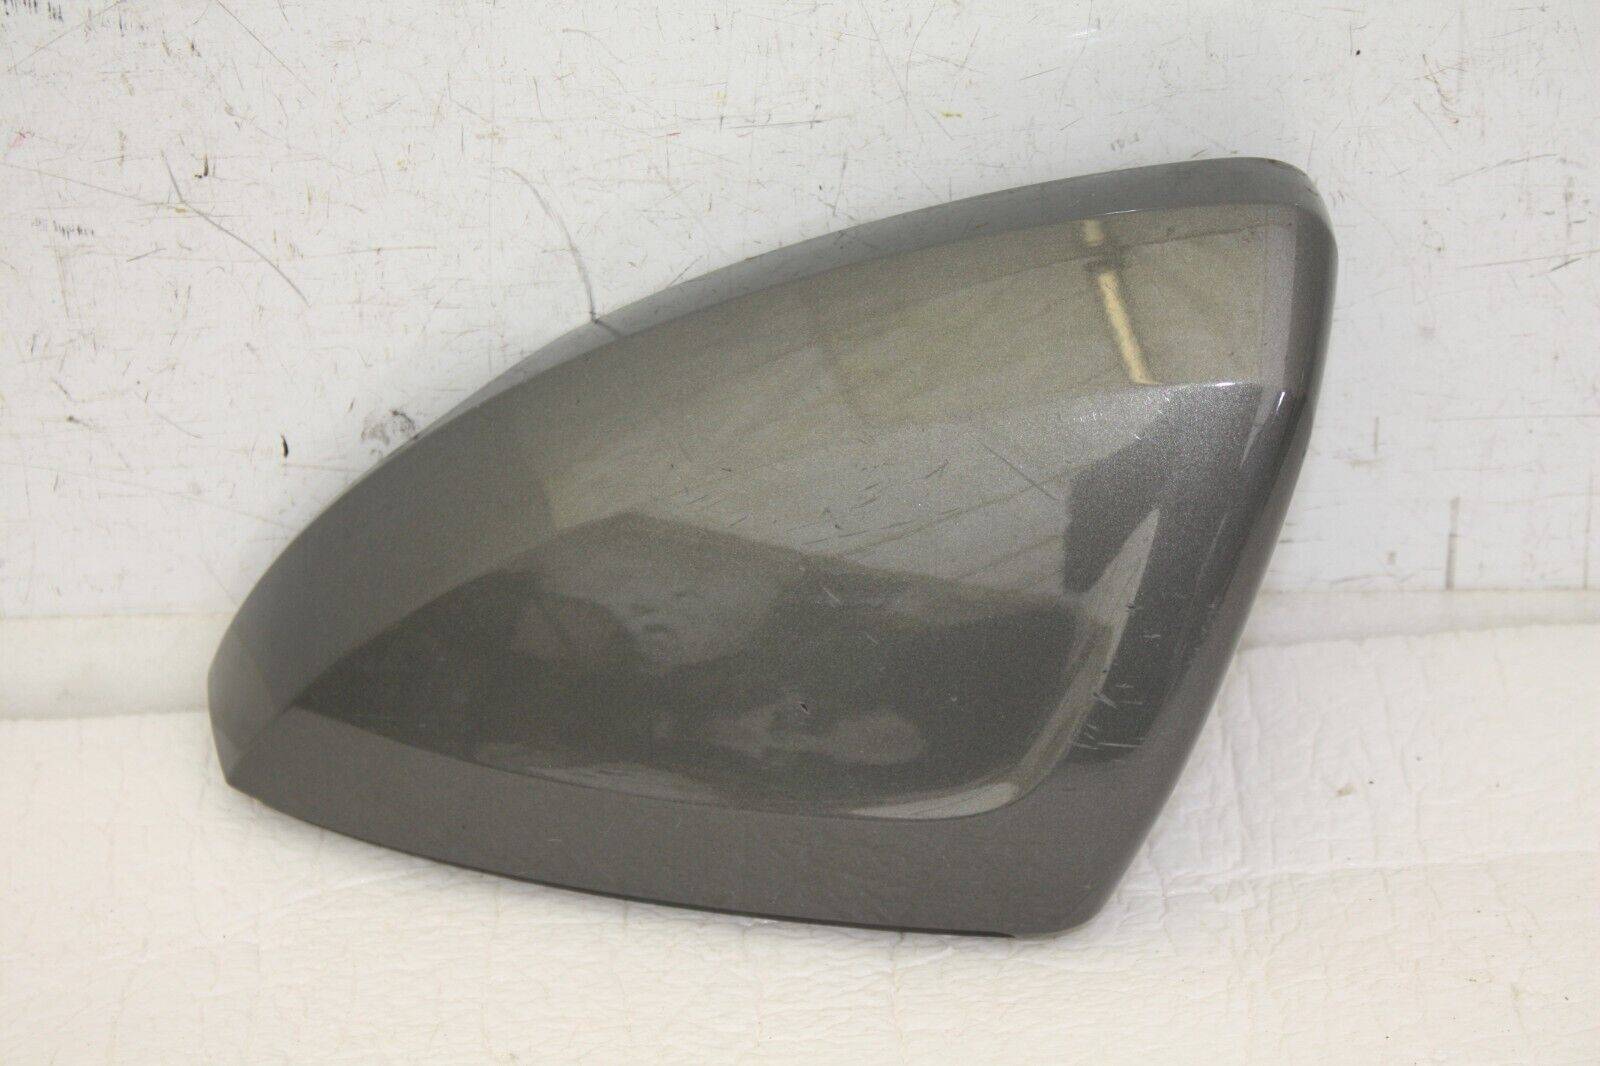 Audi-A1-VW-Polo-Left-Side-Mirror-Cover-2G0857537A-Genuine-176401790996